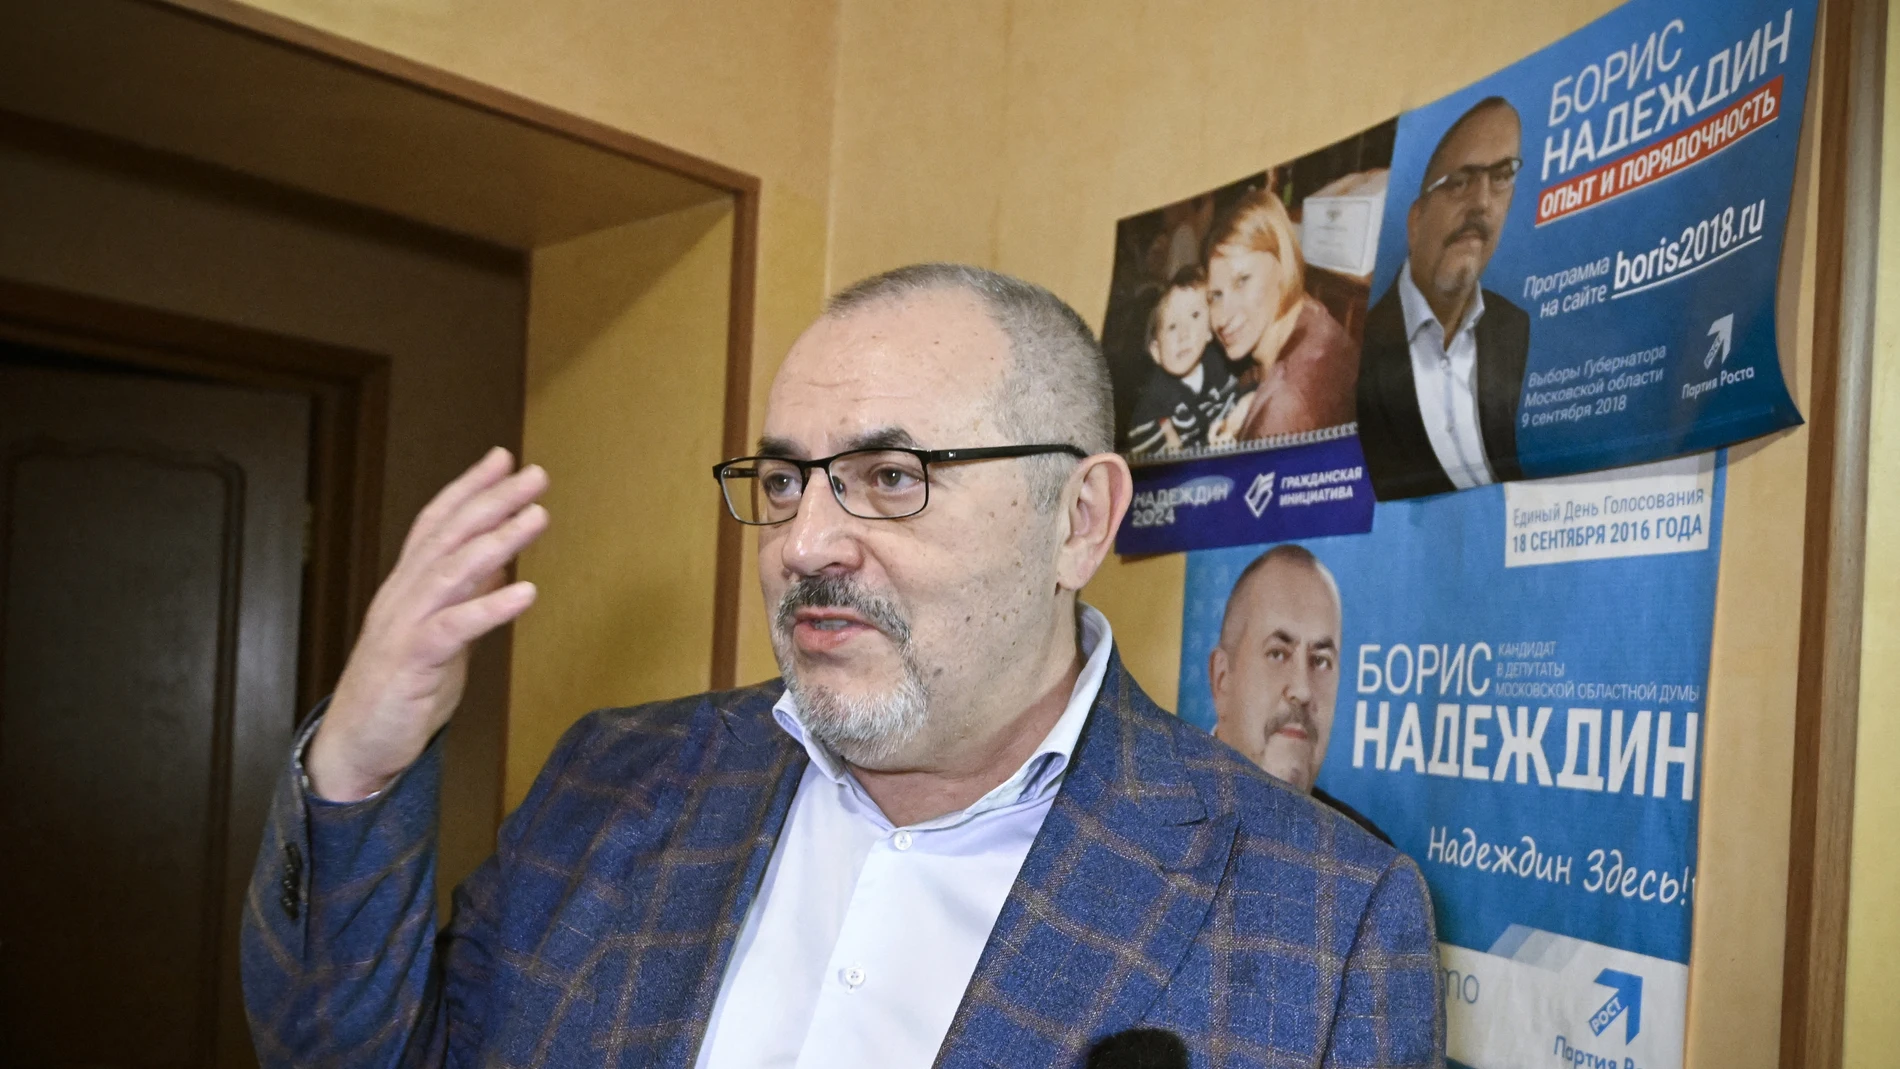 Boris Nadezhdin, the Civic Initiative Party presidential hopeful, talks to an AFP reporter by his campaign posters from past regional elections at his flat in Dolgoprudnyy on January 24, 2024.